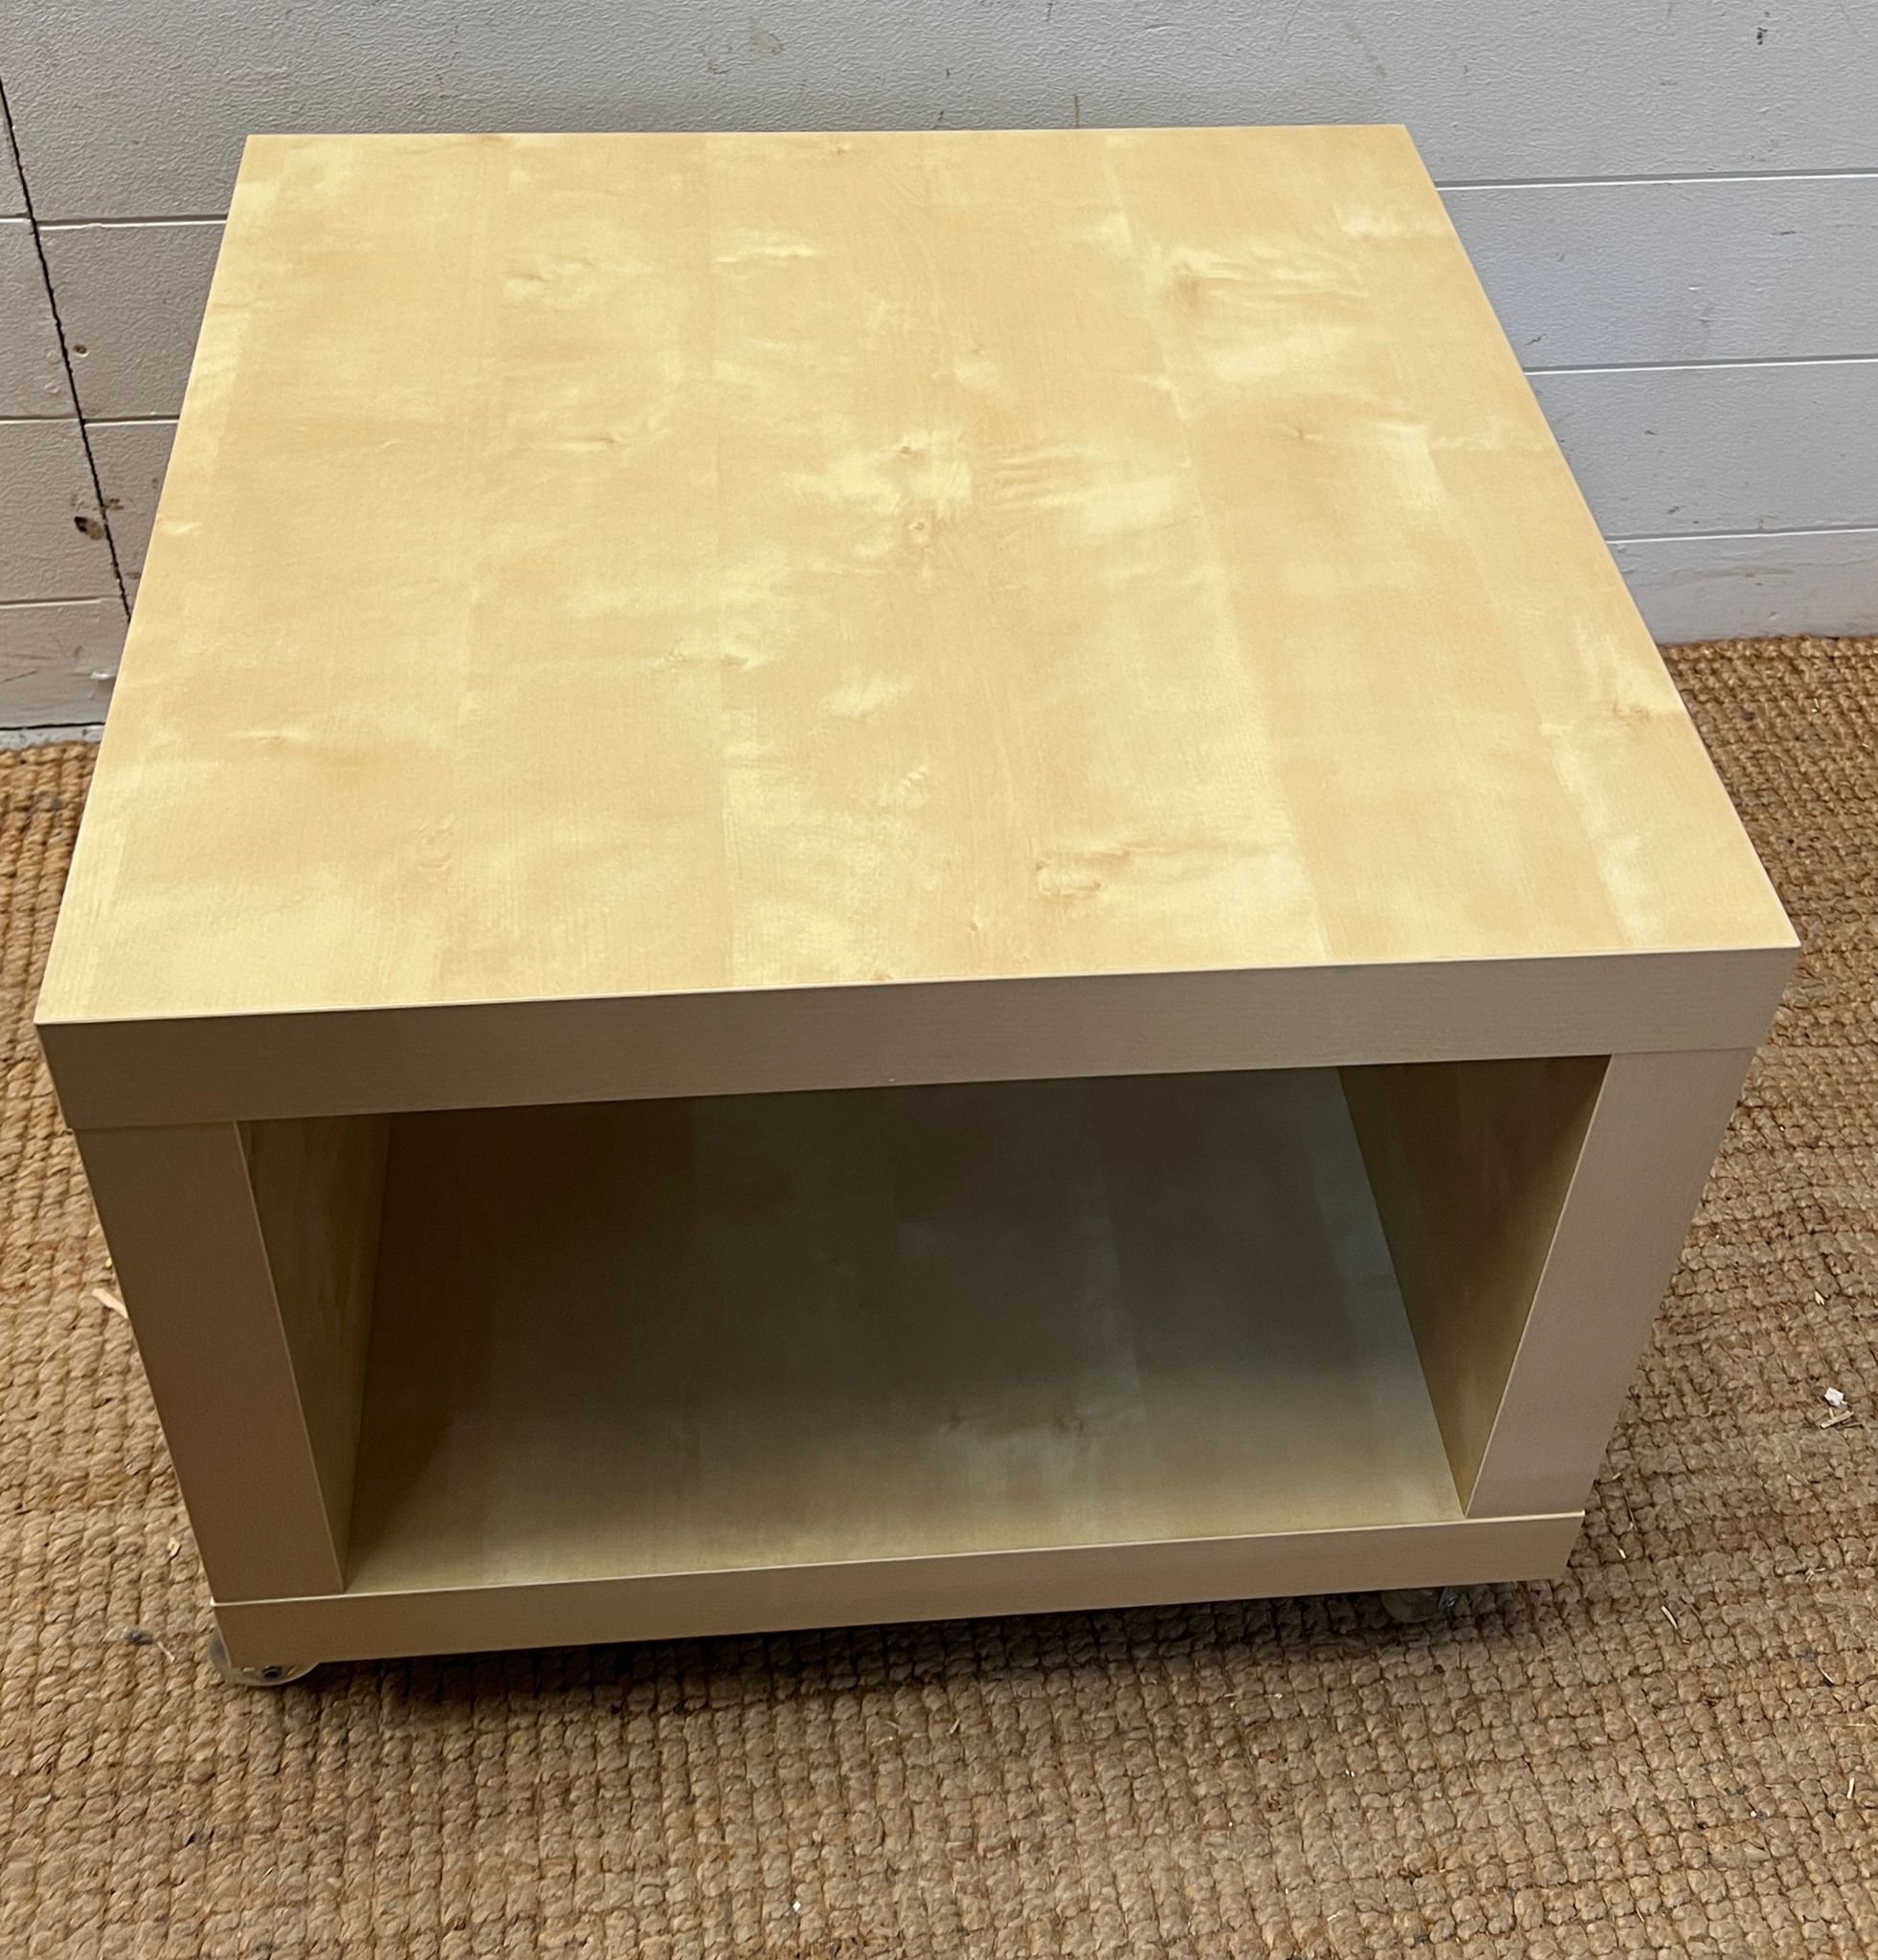 An Ikea cube storage table on wheels (H44cm Sq54cm) - Image 2 of 4